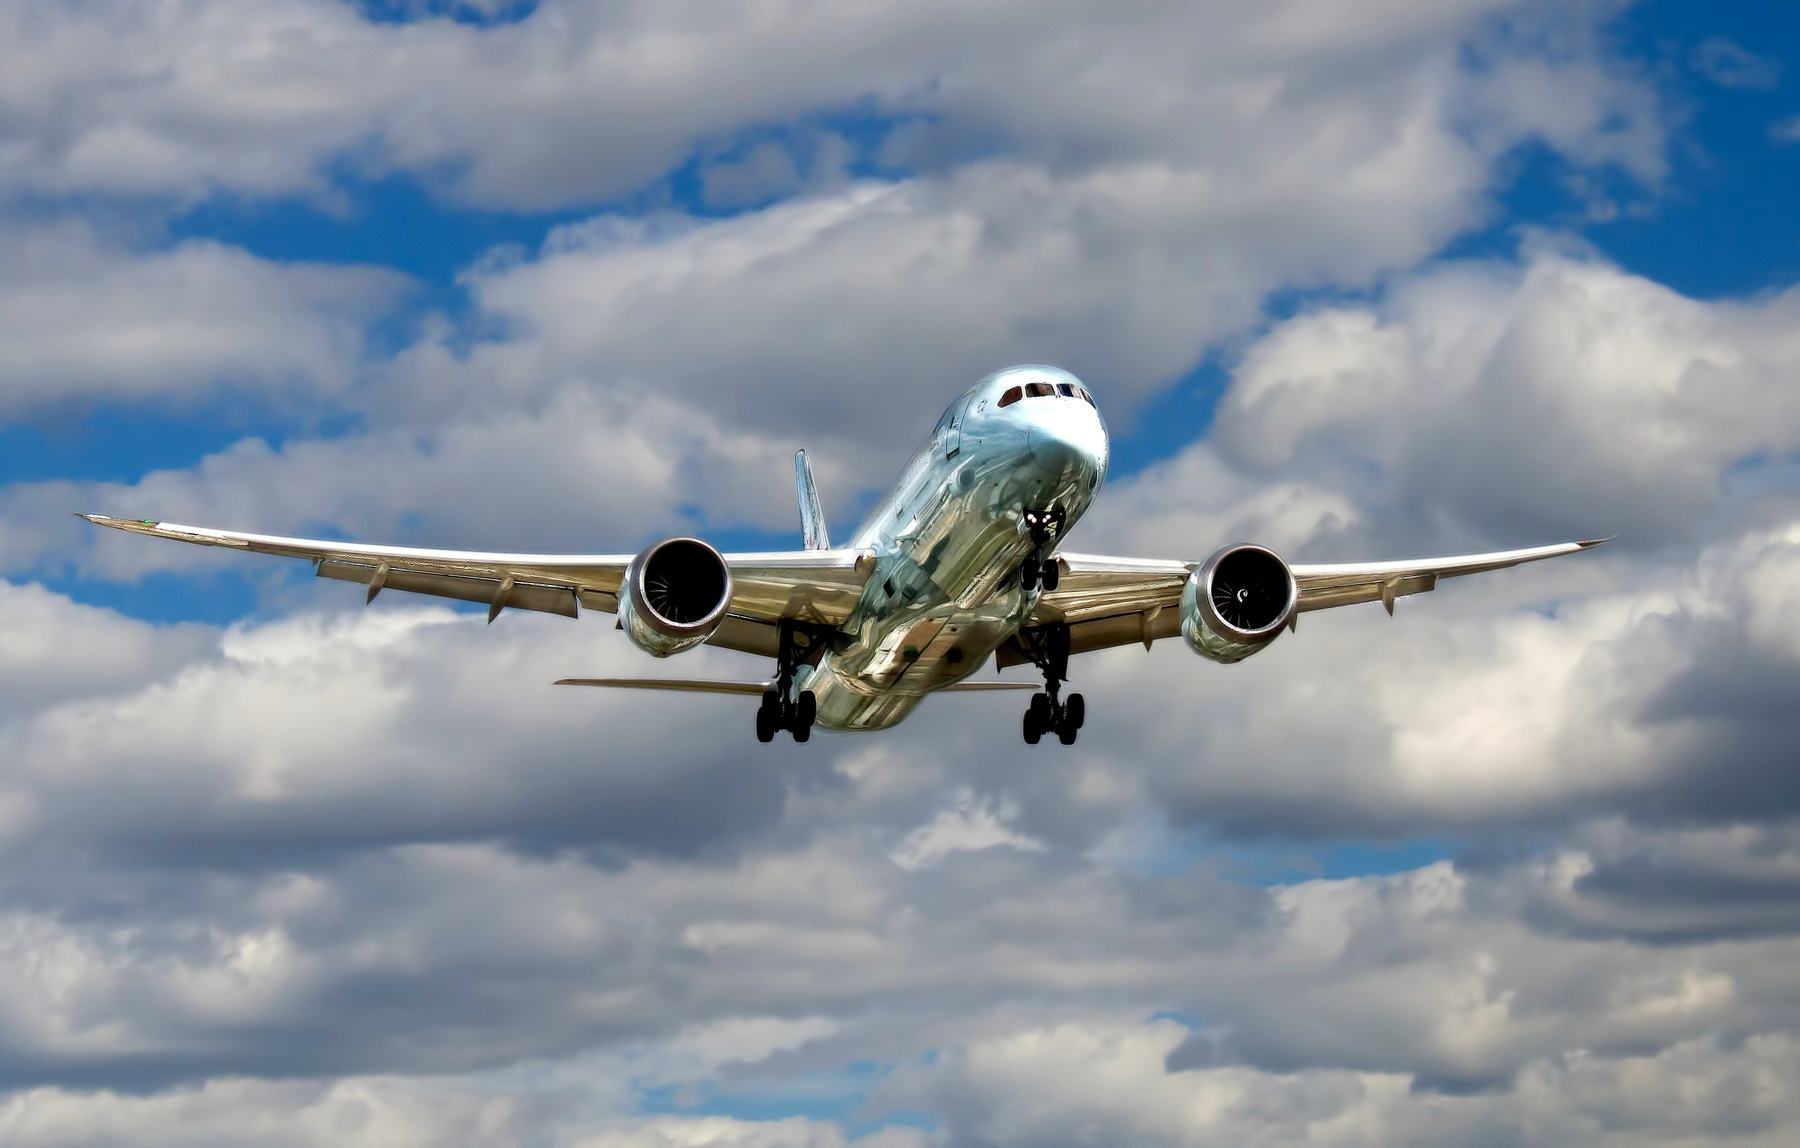 After ECJ judgment: Airlines are Facing a Wave of Claims